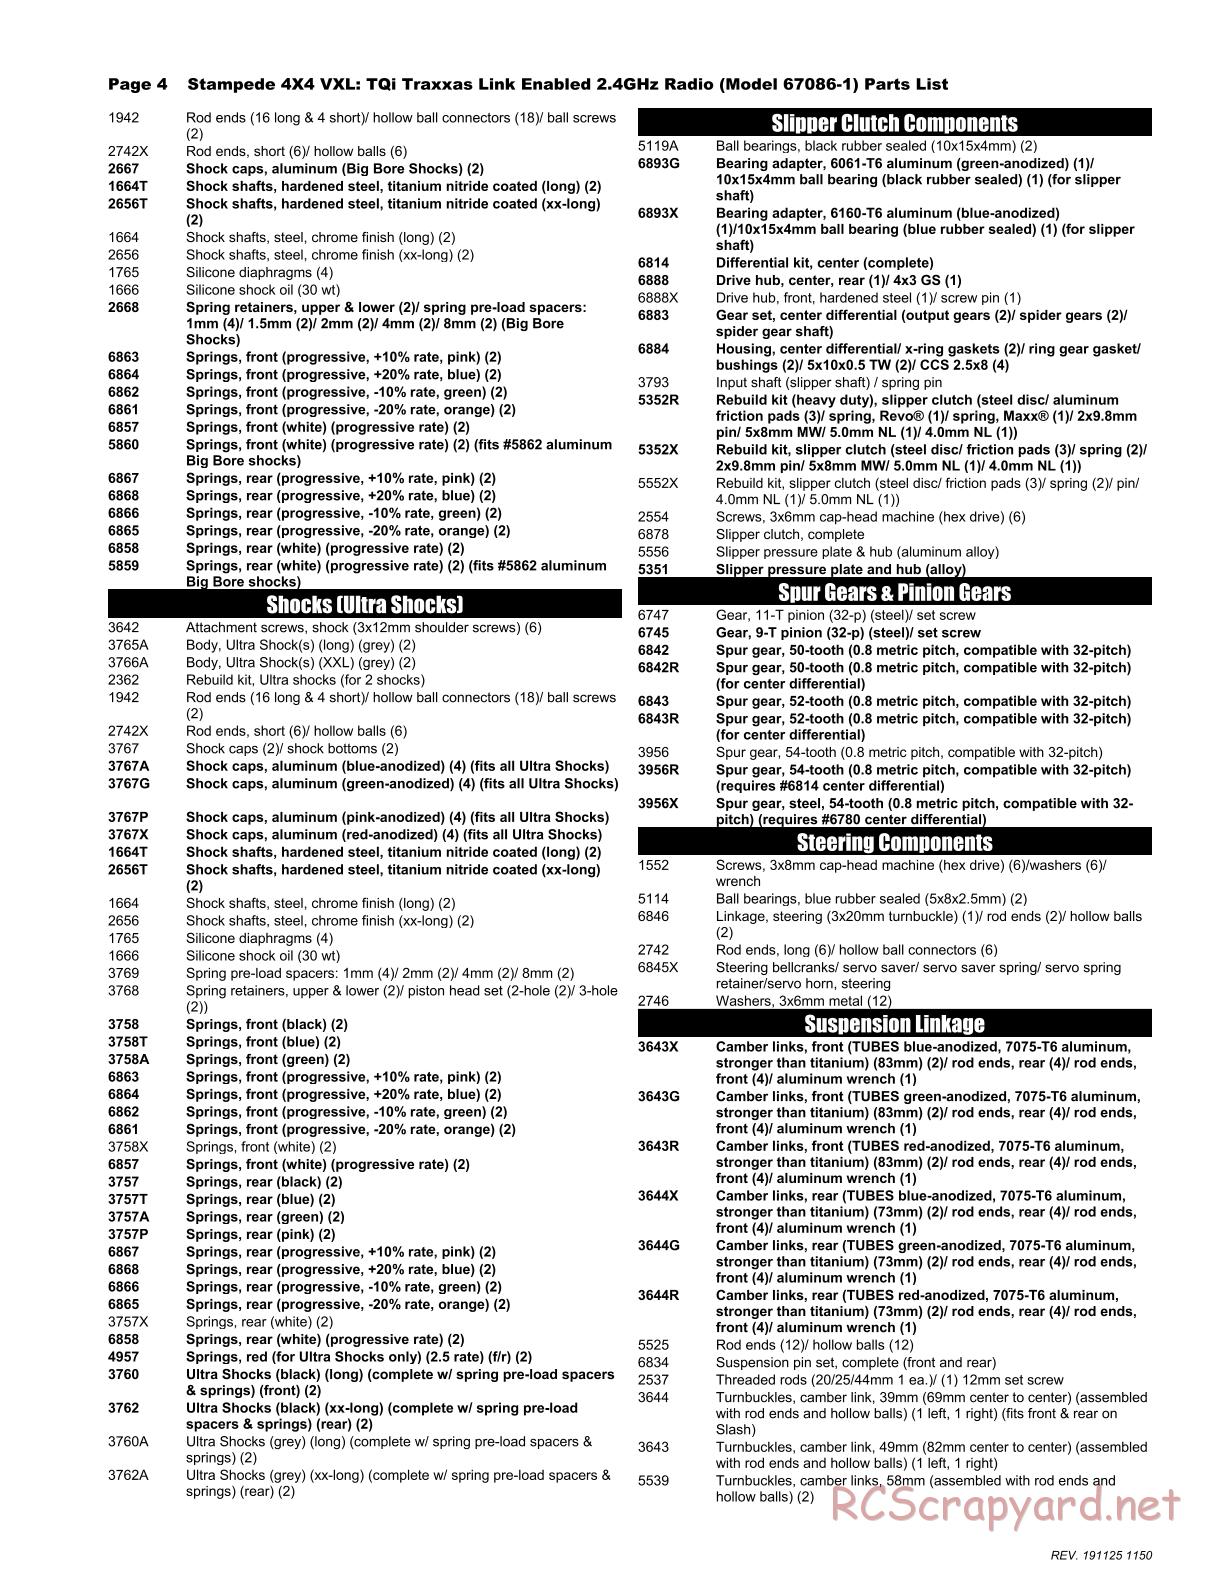 Traxxas - Stampede 4x4 VXL (2015) - Parts List - Page 4